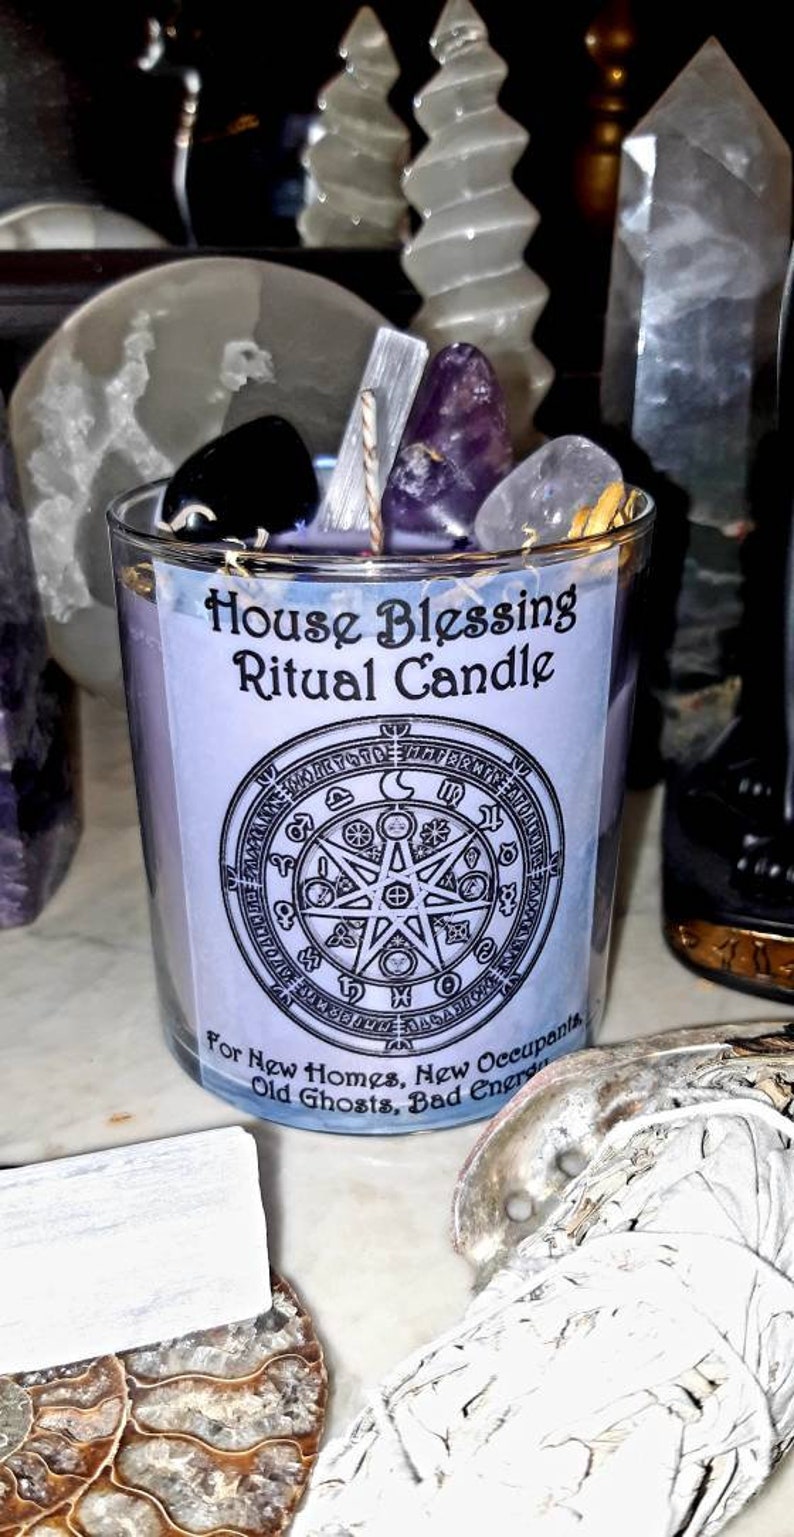 New Home Blessing Candle, New Home Candle, House Clearing Candle, Banishing Candle, New Home Ritual, House Blessing Ritual, Witchy gift image 1